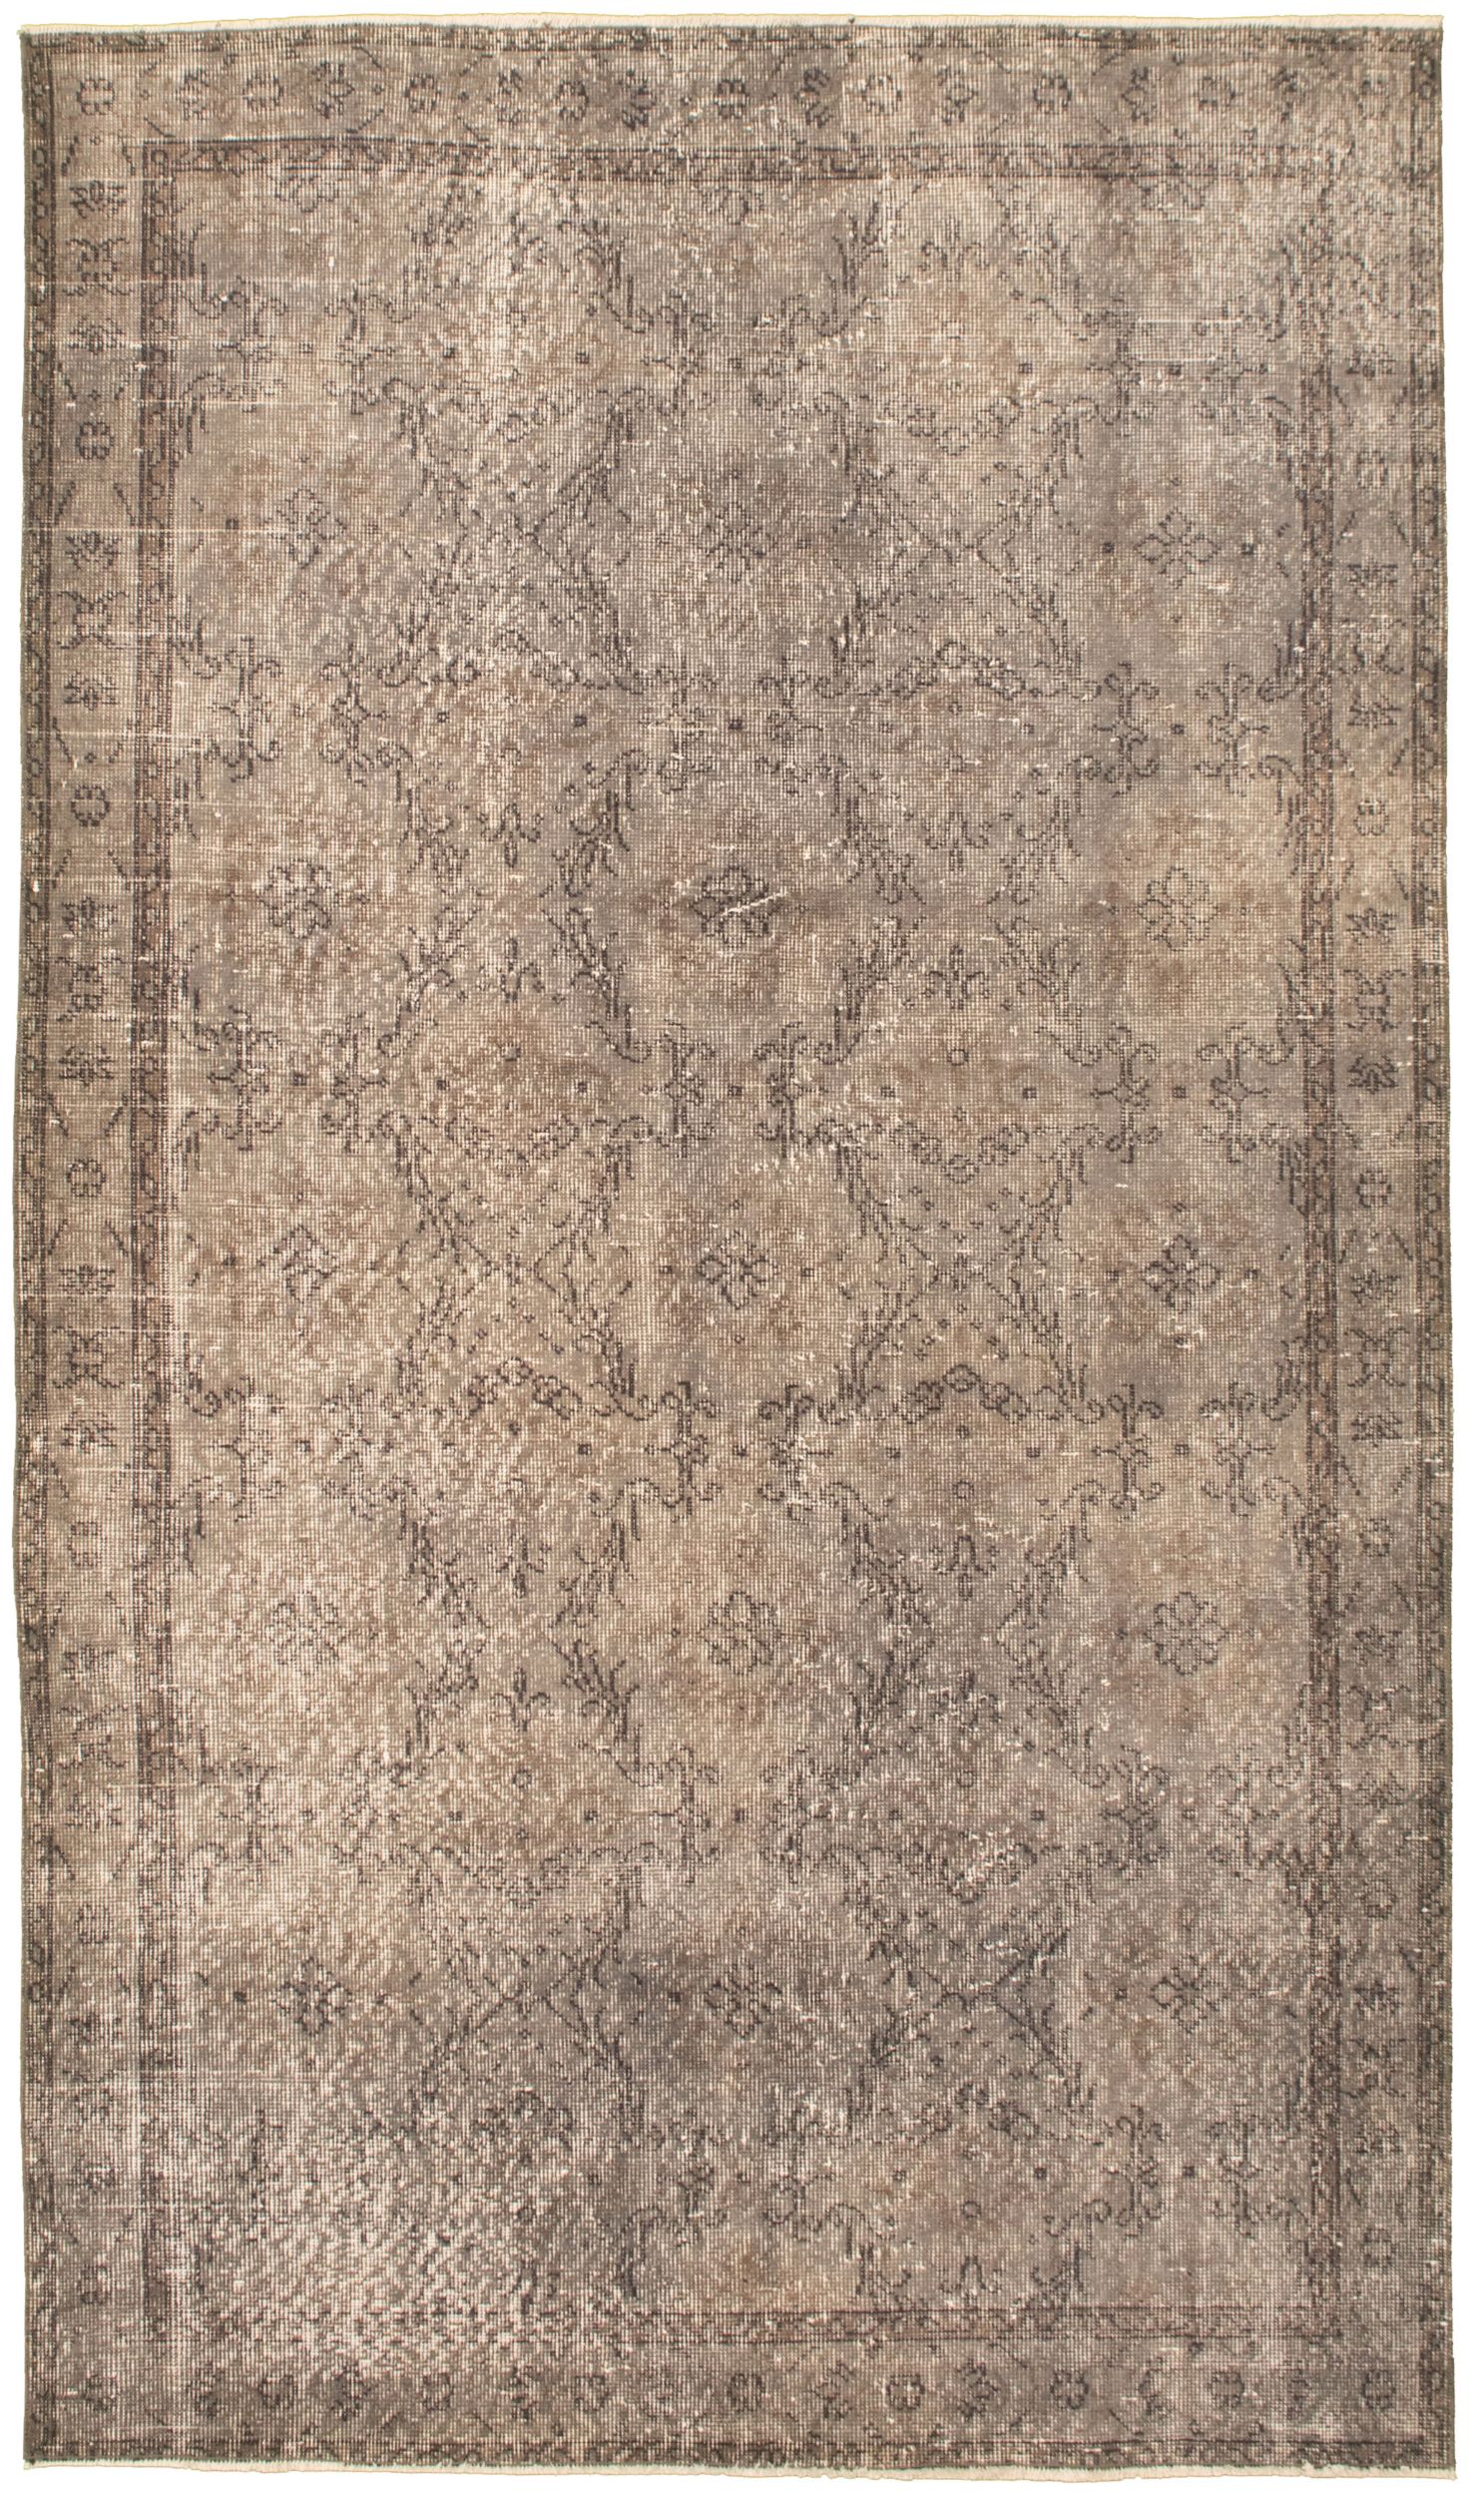 Hand-knotted Melis Vintage Grey Wool Rug 4'10" x 8'6" Size: 4'10" x 8'6"  